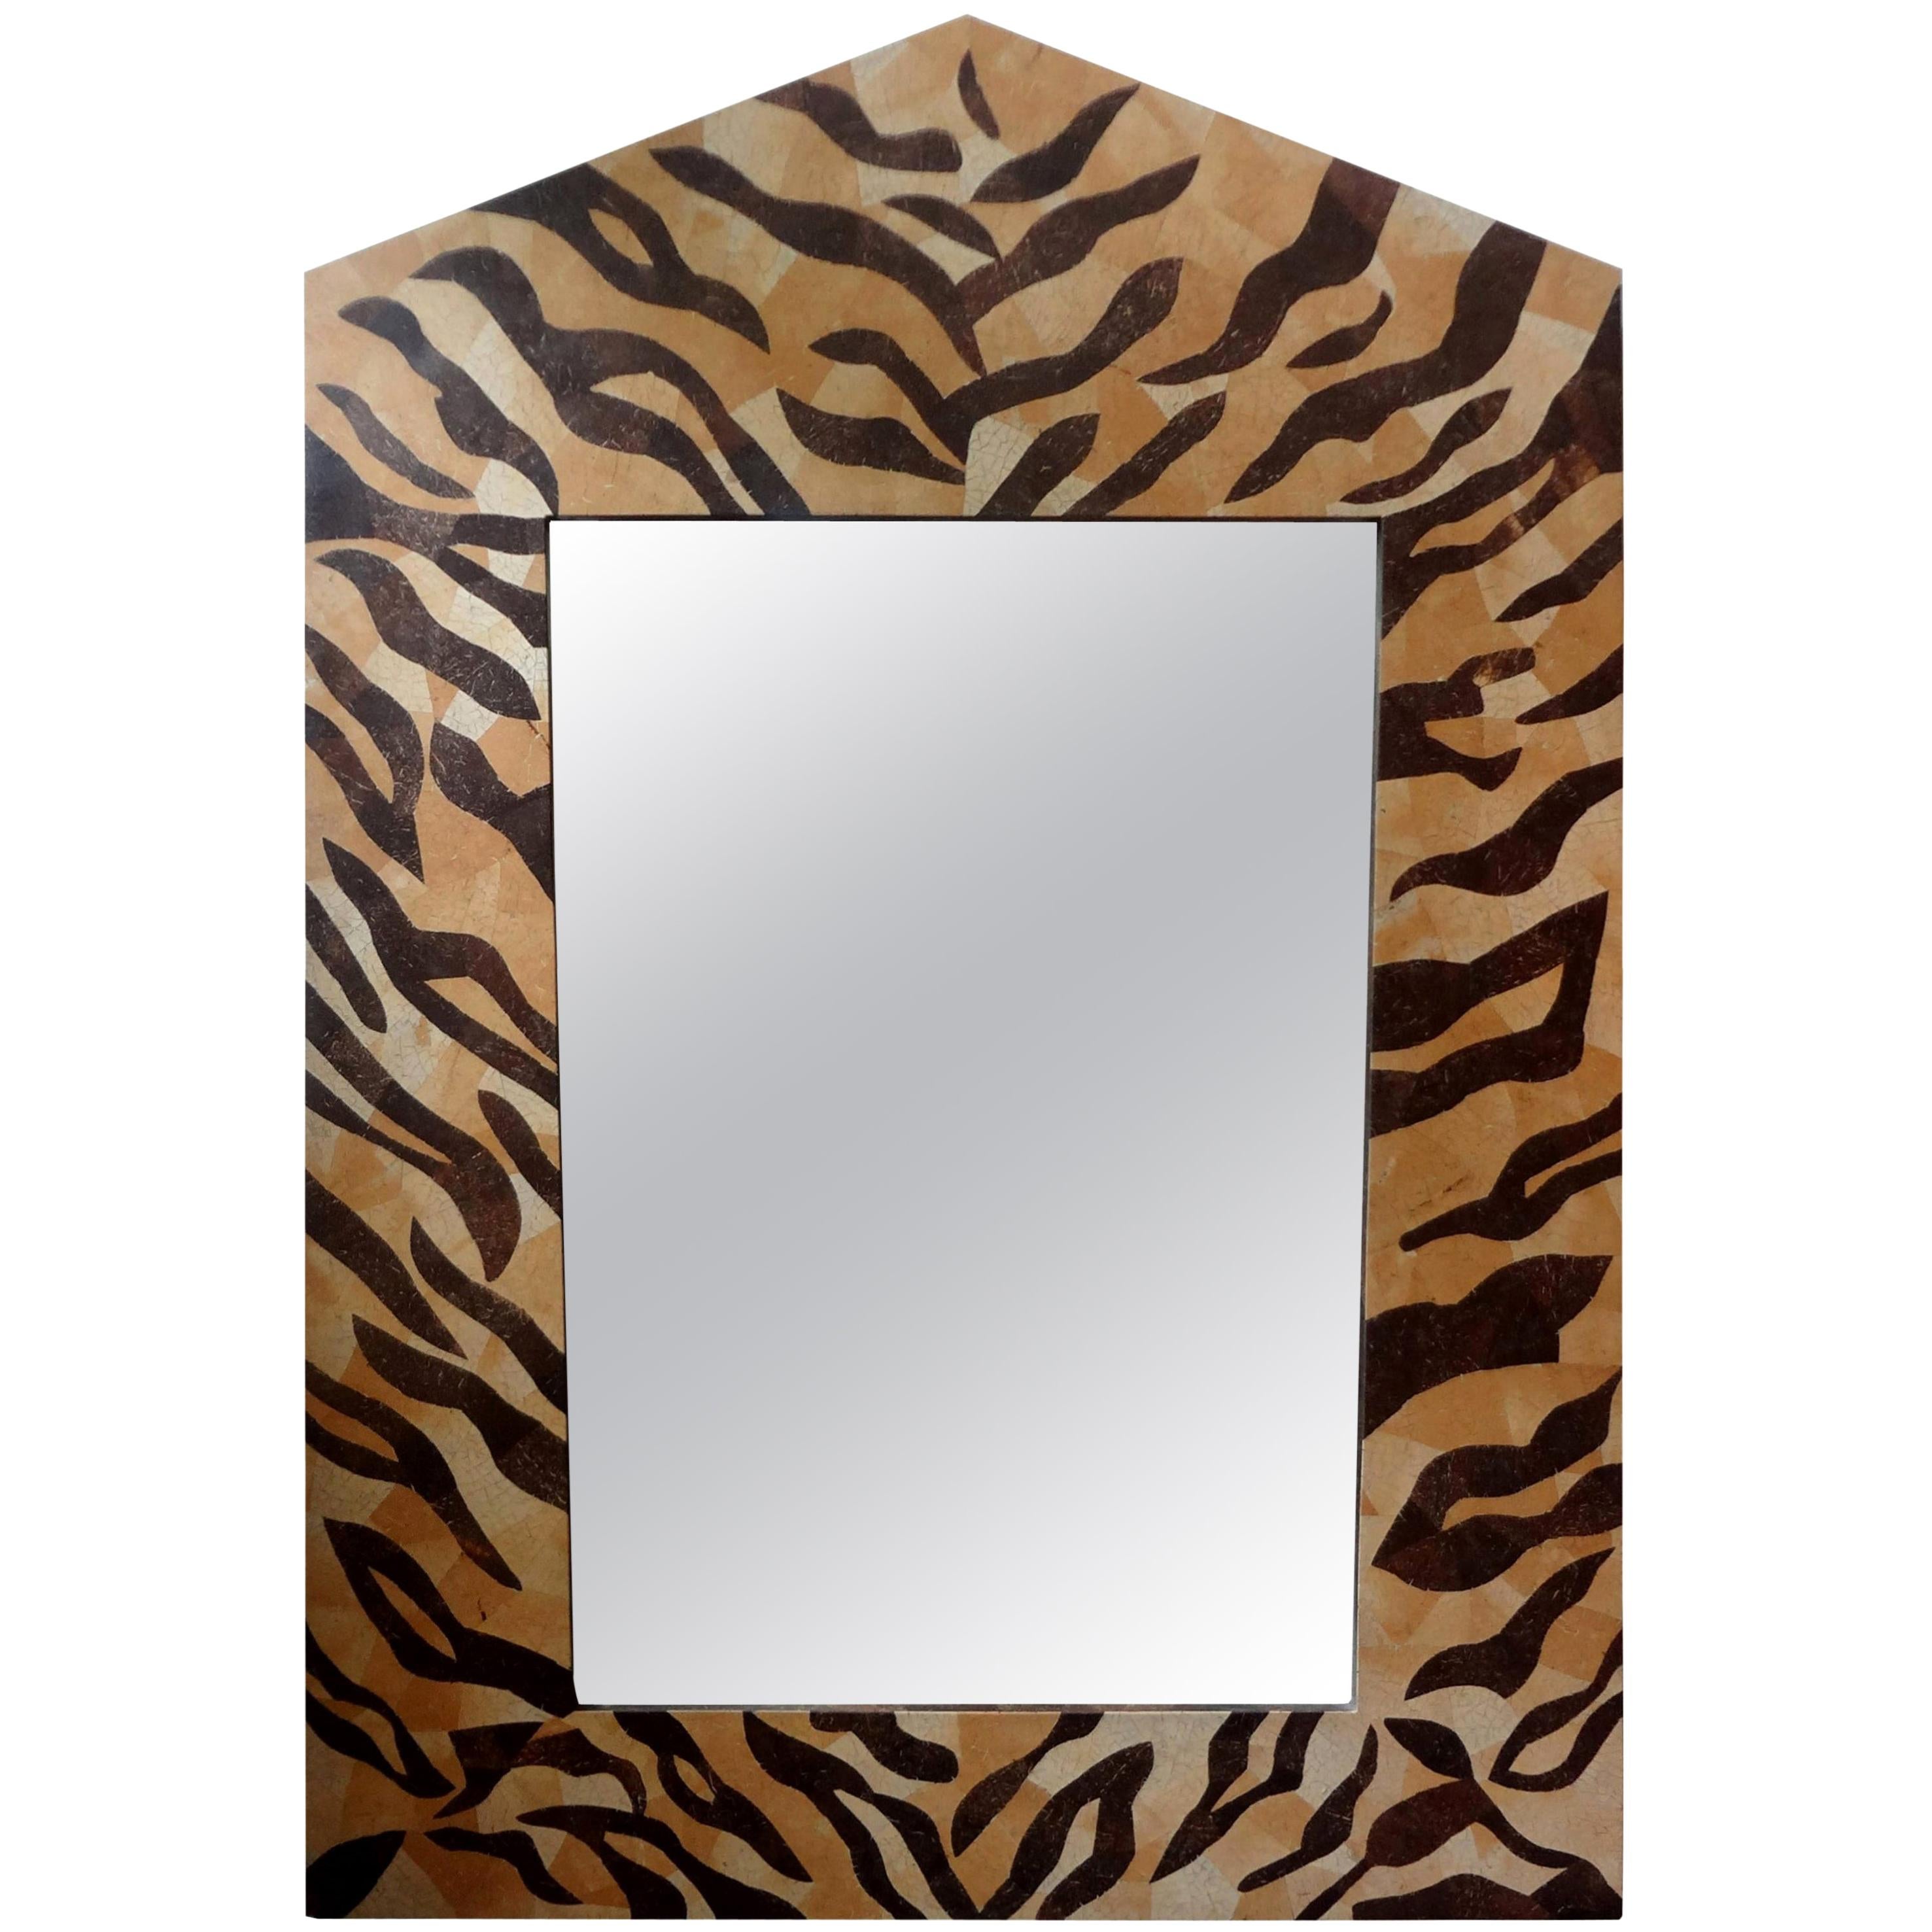 Large unusual midcentury neoclassical style coconut shell mirror. This stunning midcentury Karl Springer style modern neoclassical mirror is made of coconut shell in a leopard pattern. Our versatile mirror would work well in many rooms and